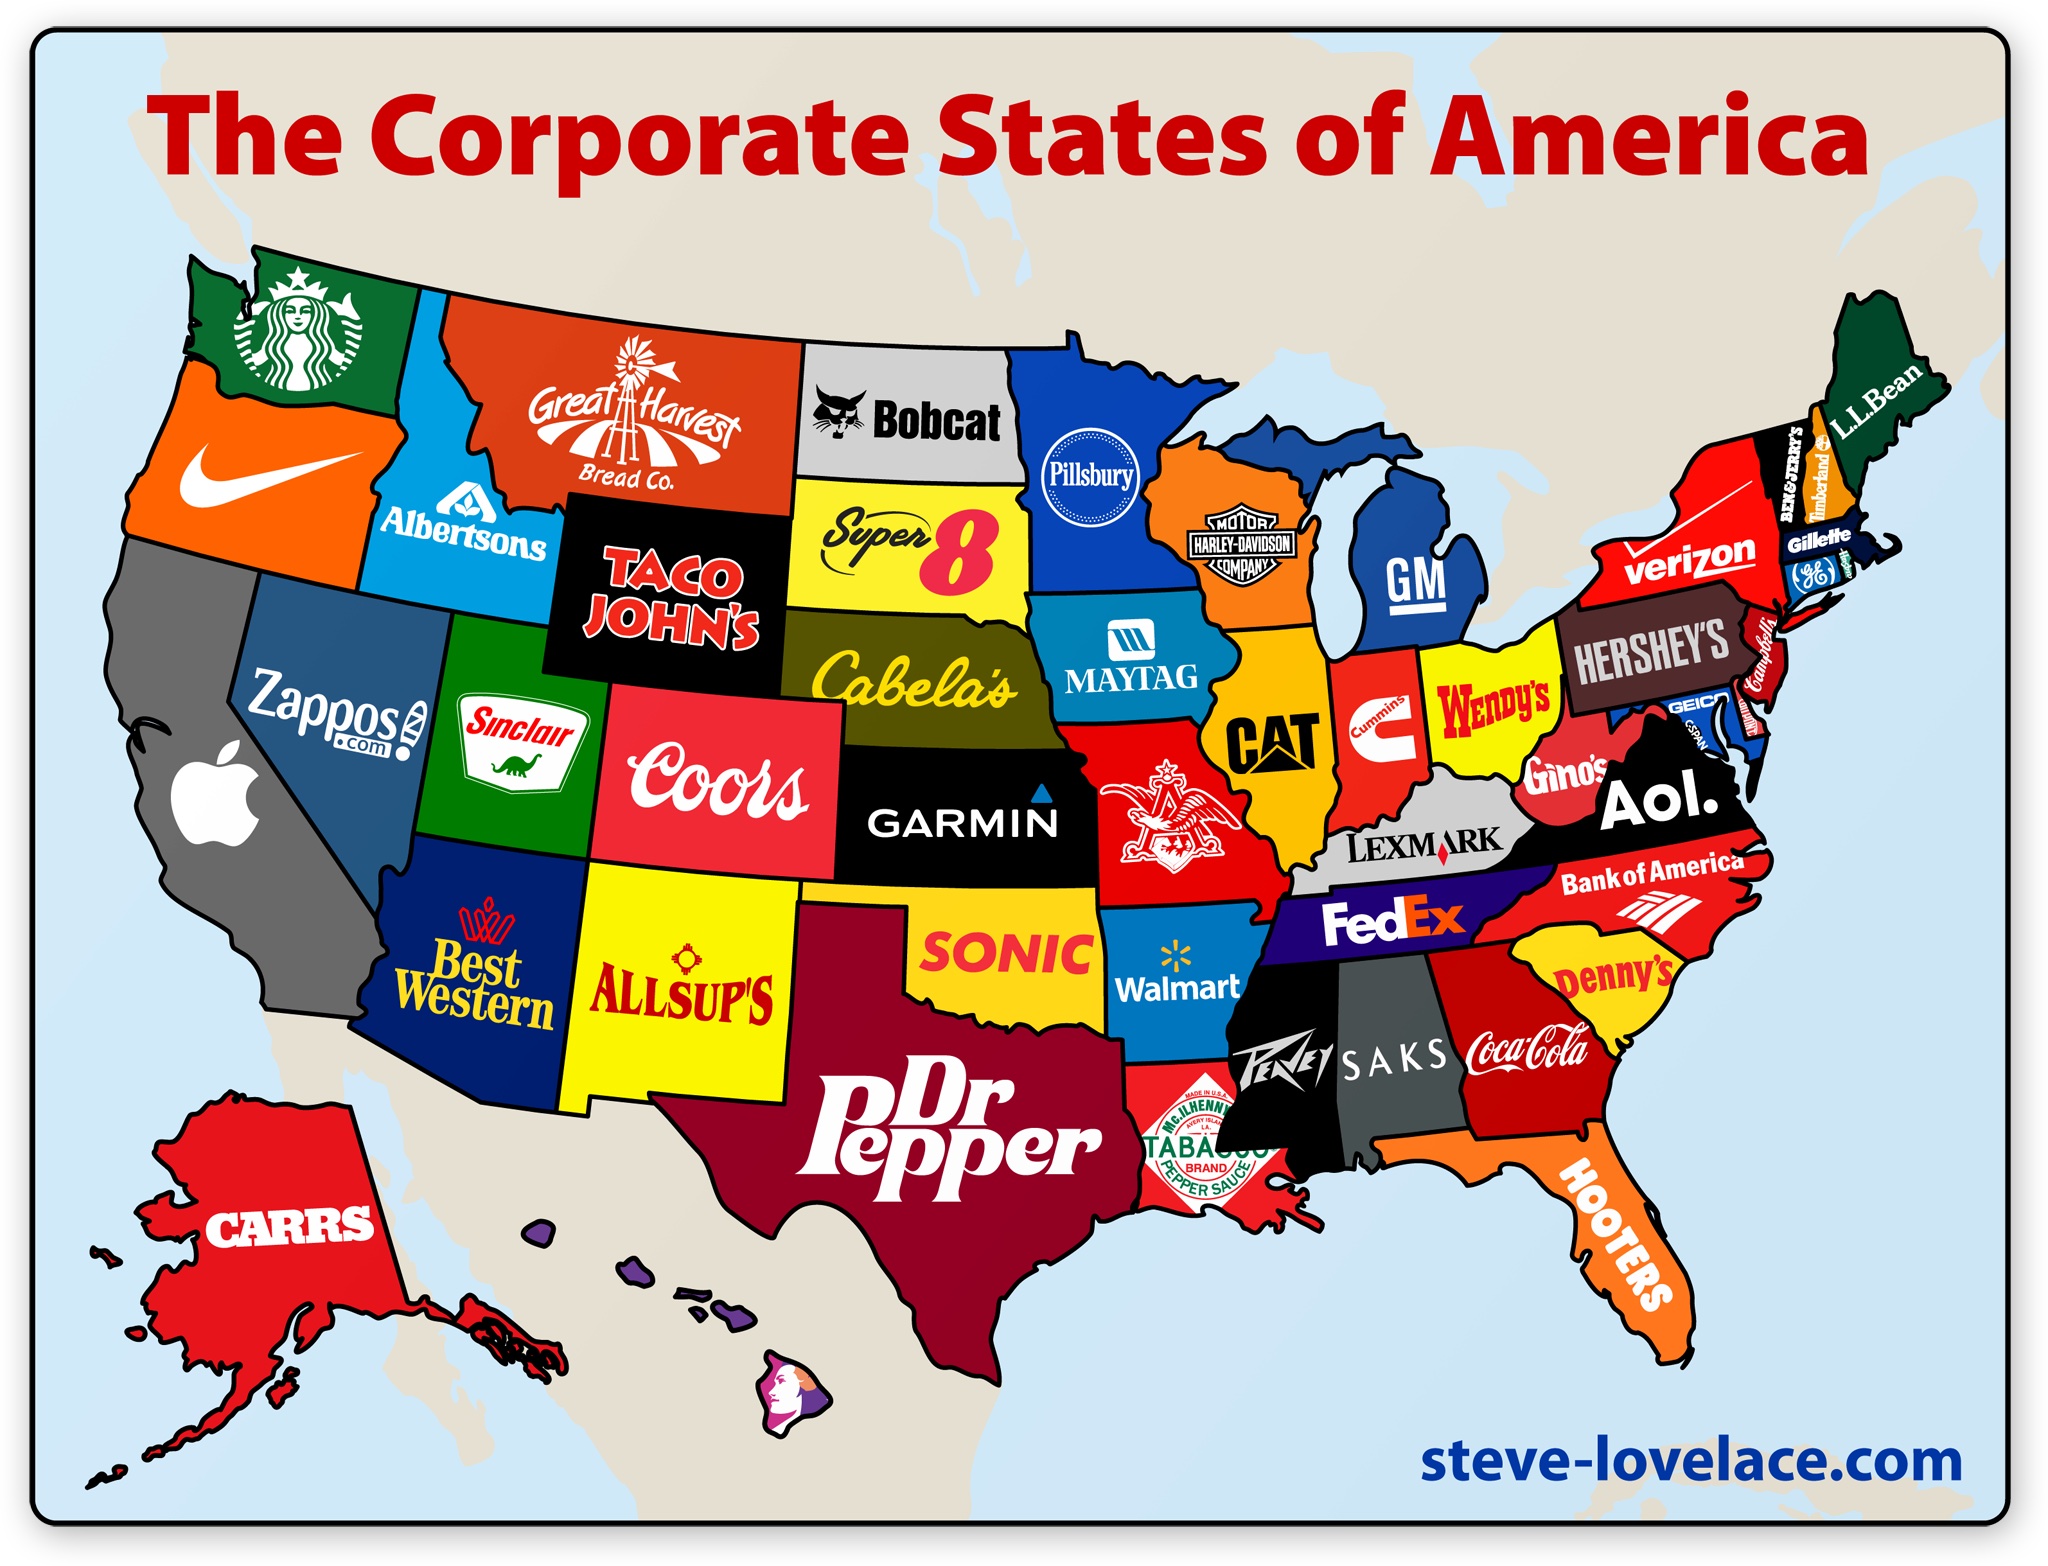 heroes become the villain - corporate states of america - The Corporate States of America Great Harvest Bobcat Pillsbury read Co Albertsons Taco Super 8 Gm John'S Cabela's Maytag Zappos Sinclair Coors Cat Wendy's Garmin Lexmark wkr Best Allsup'S Western C